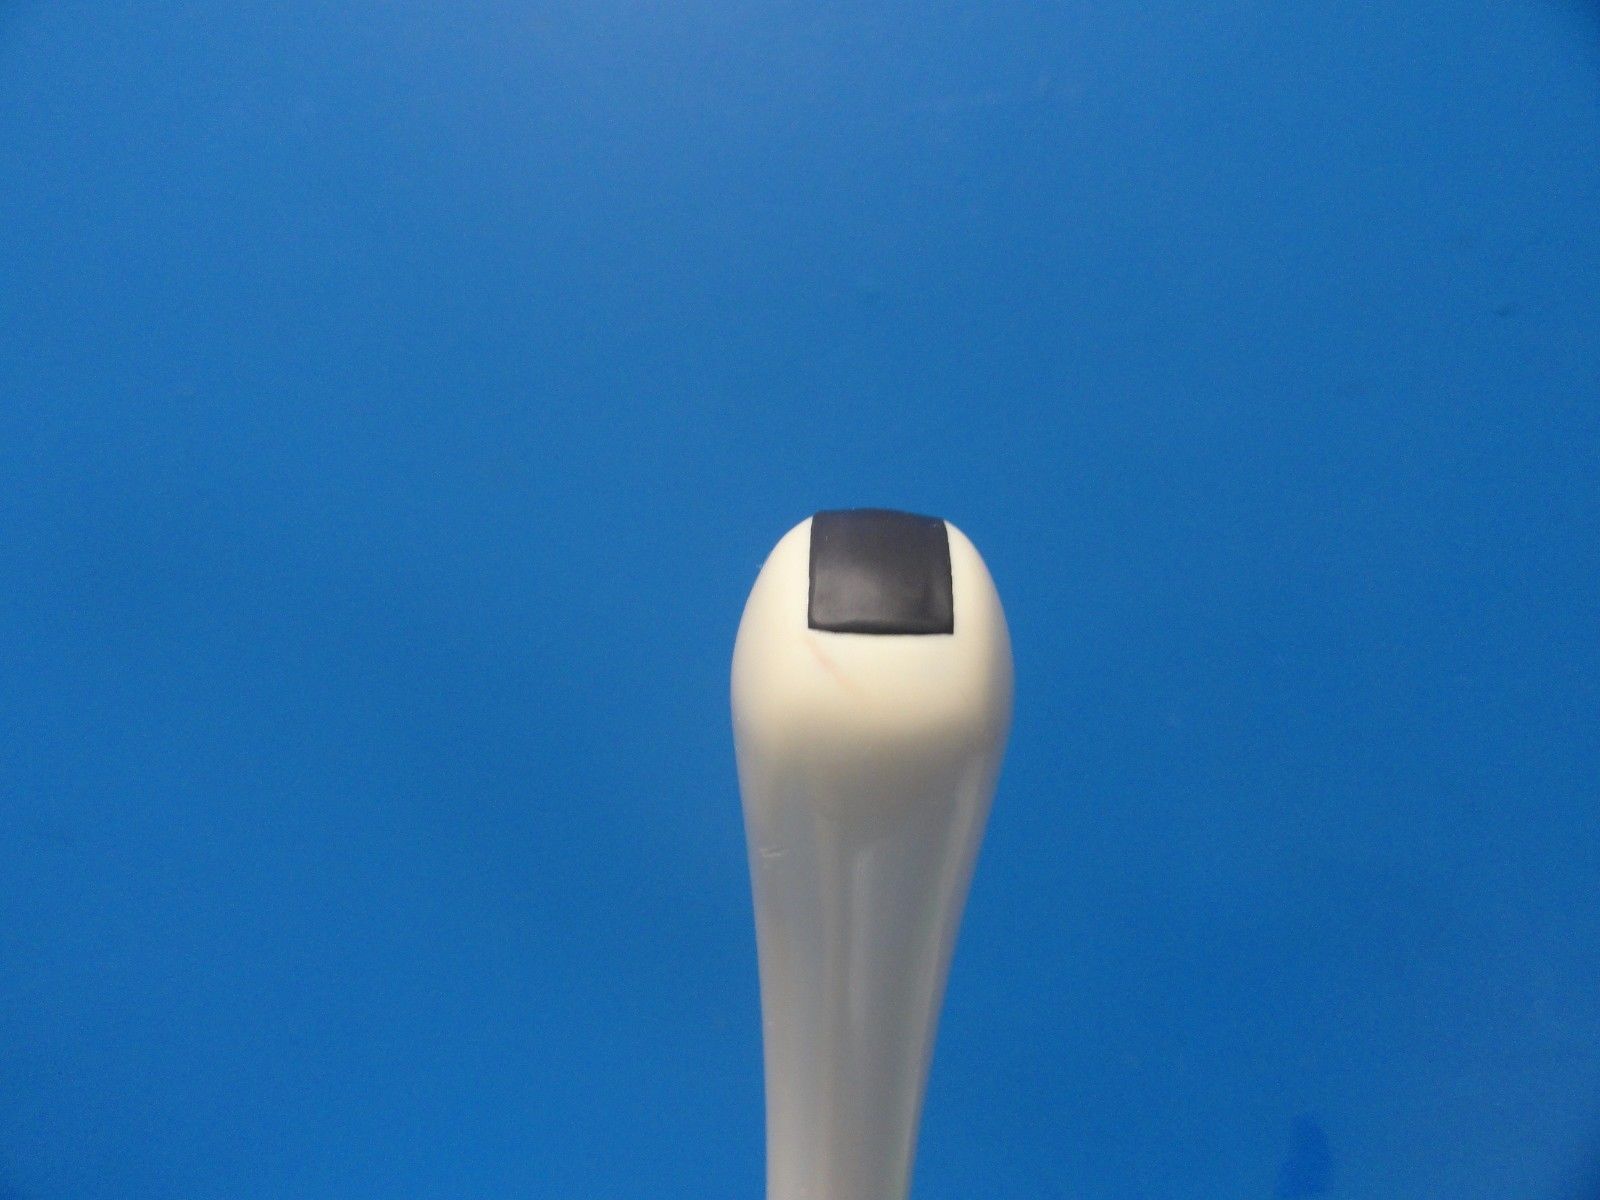 a close up of a white object on a blue background